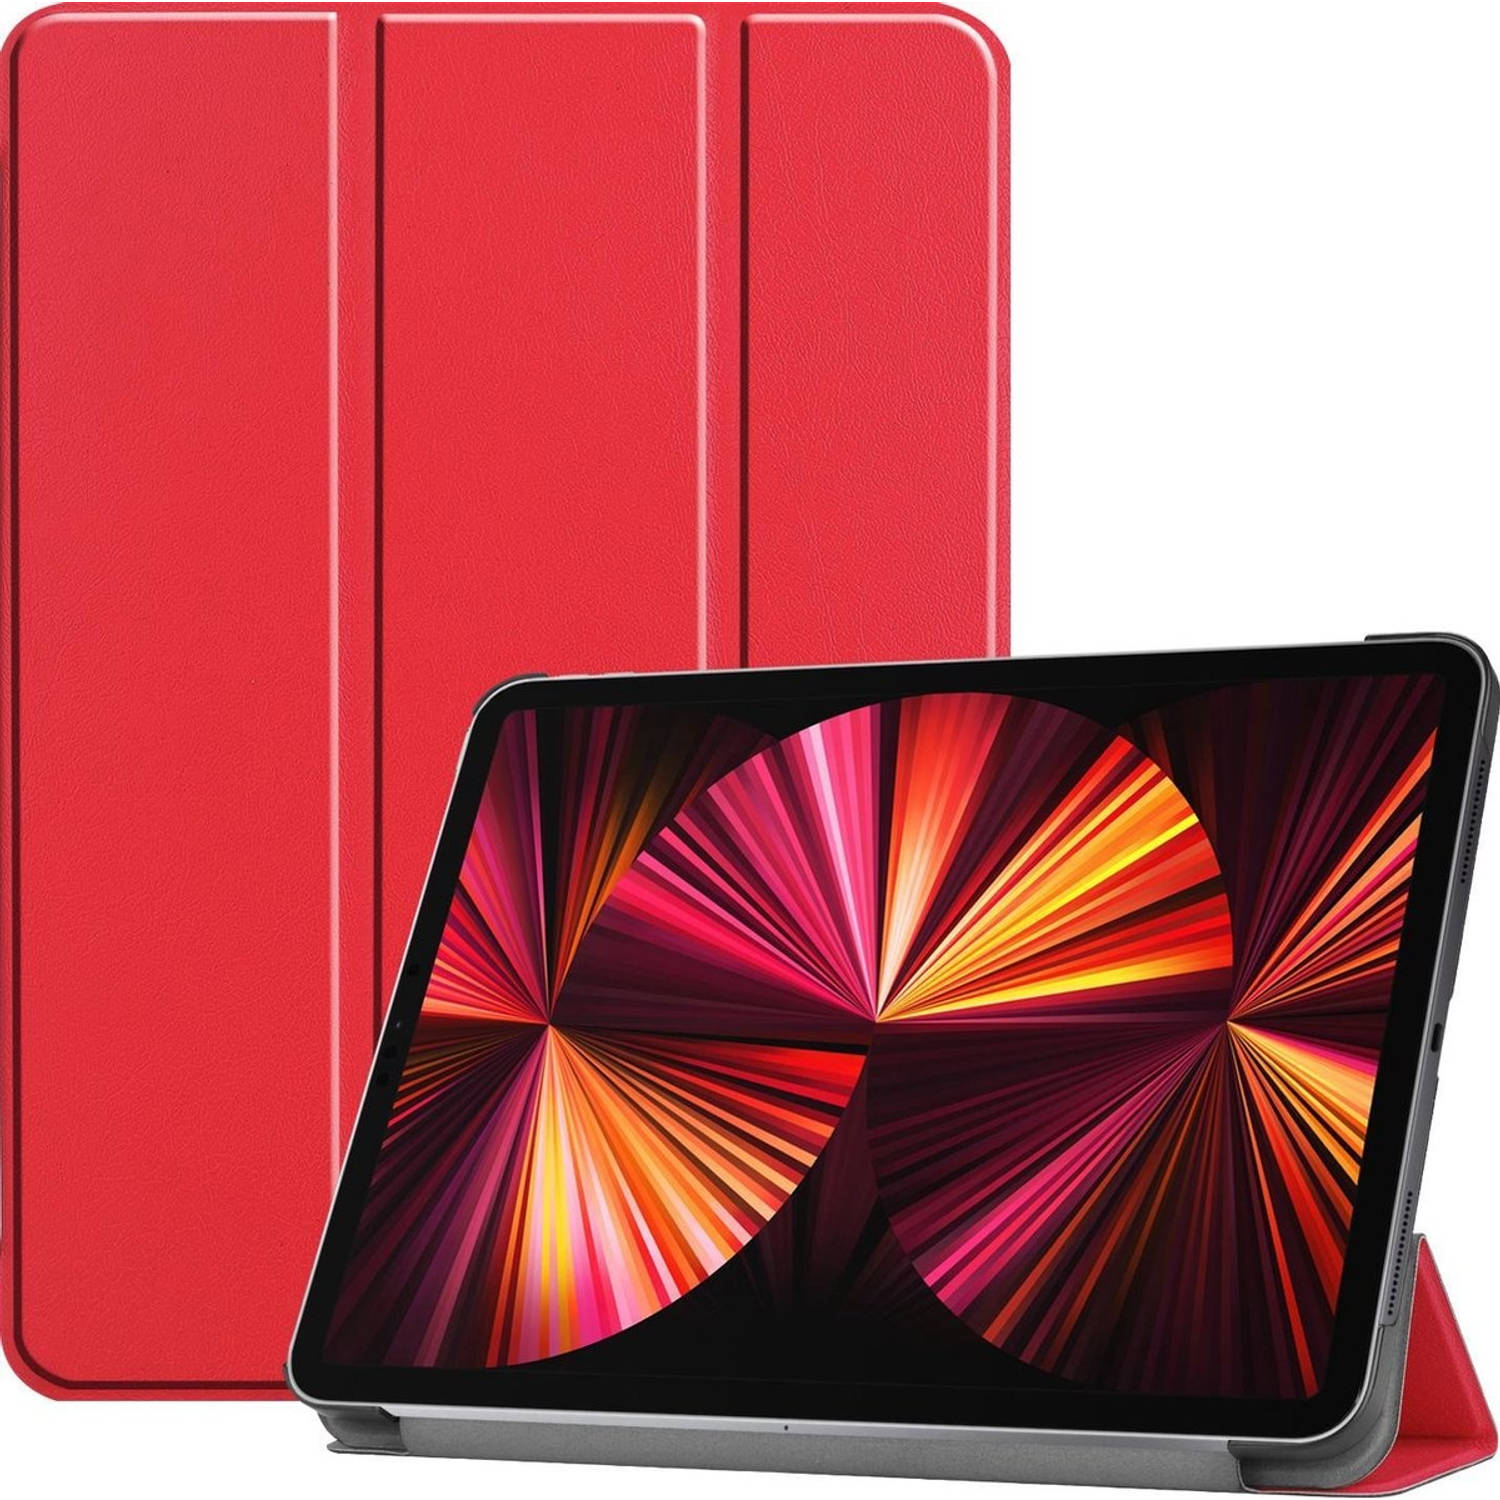 Basey Ipad Pro 2021 11 Inch Hoes Case Hoesje Rood Hardcover Book Case Cover